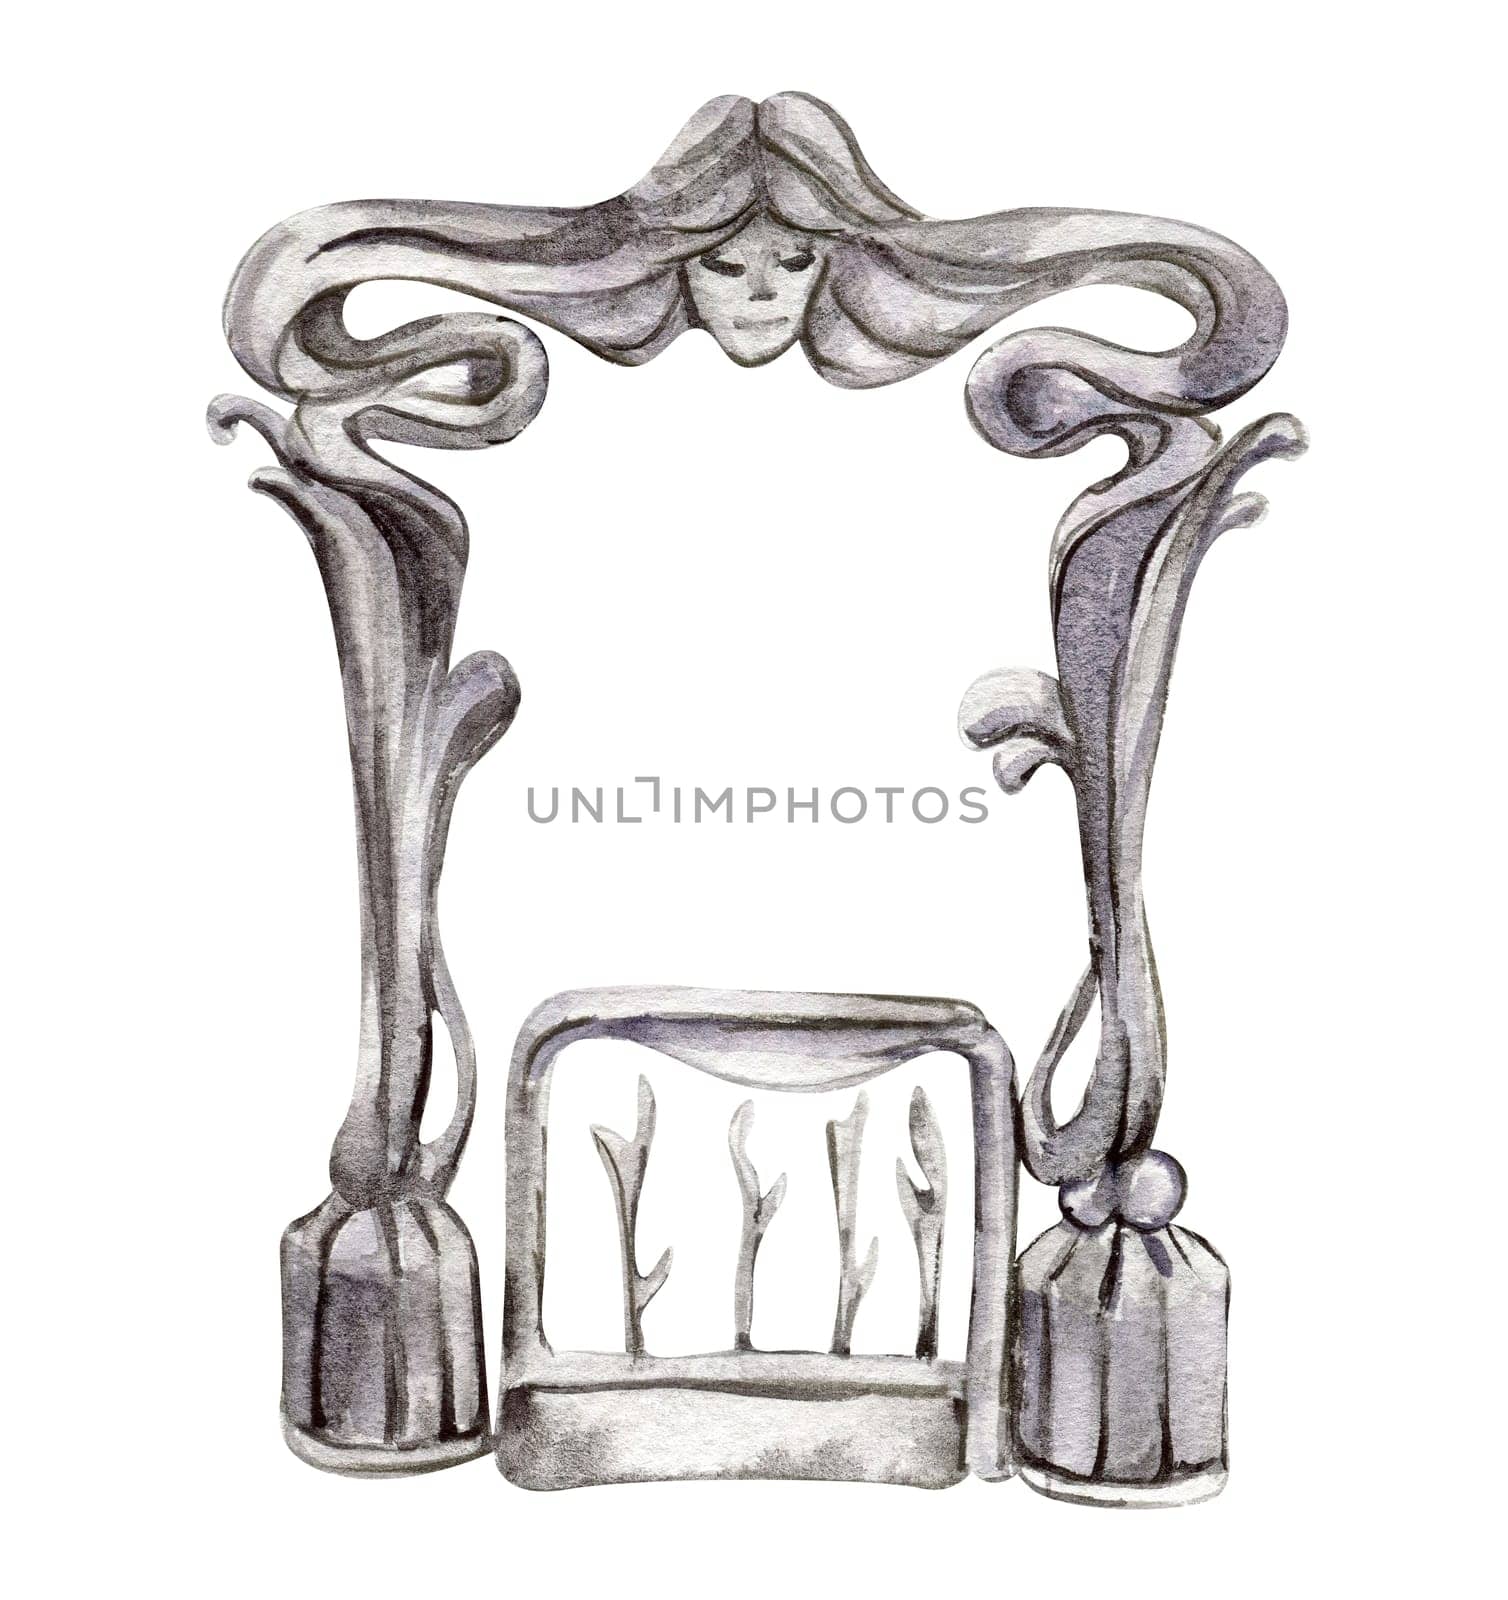 Iron gate for fairy. Hand painted fairy tale illustration for greeting cards, prints, post cards and souvenirs. Illustartion isilated on white background.